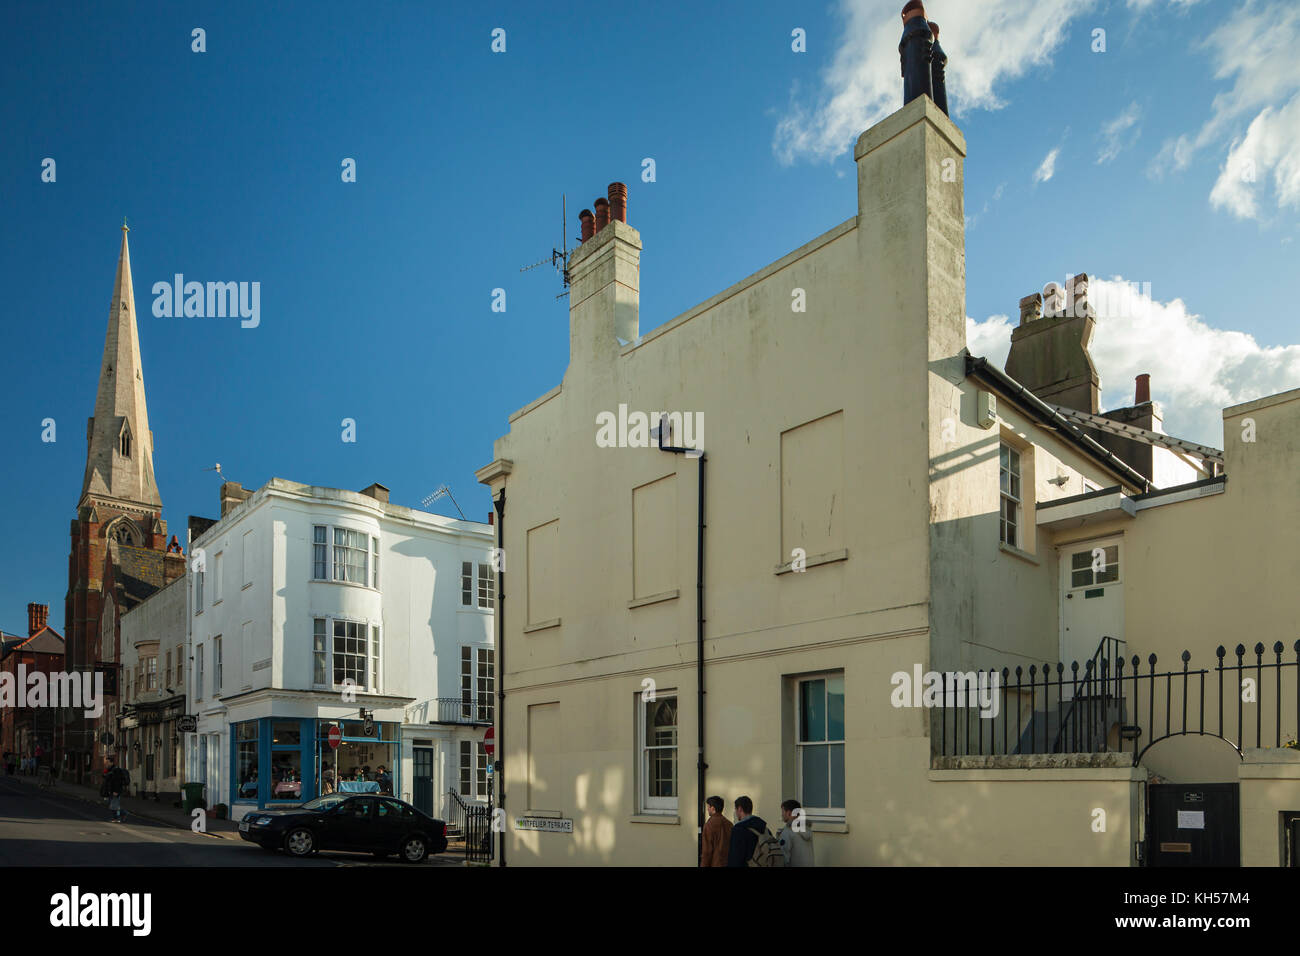 A street in Brighton, East Sussex, England. Stock Photo